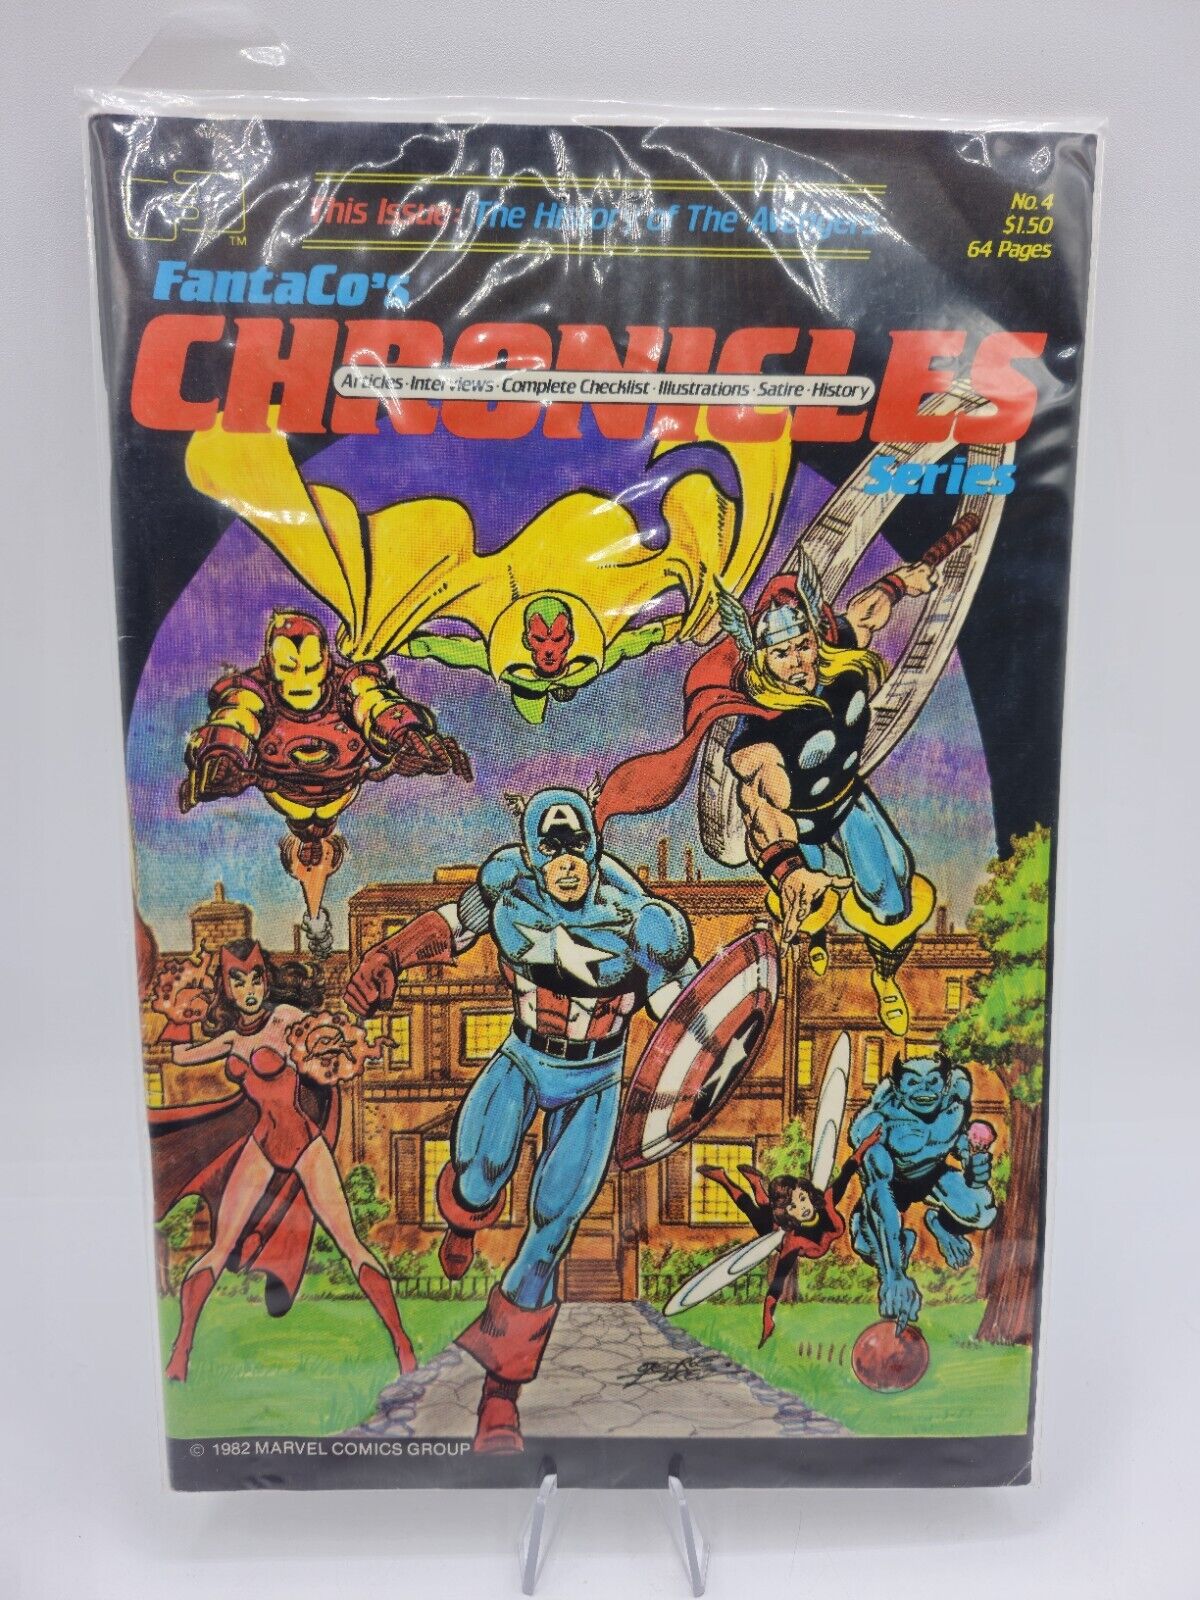 FANTACO'S CHRONICLES #4 (1982) History of the Avengers, George Perez